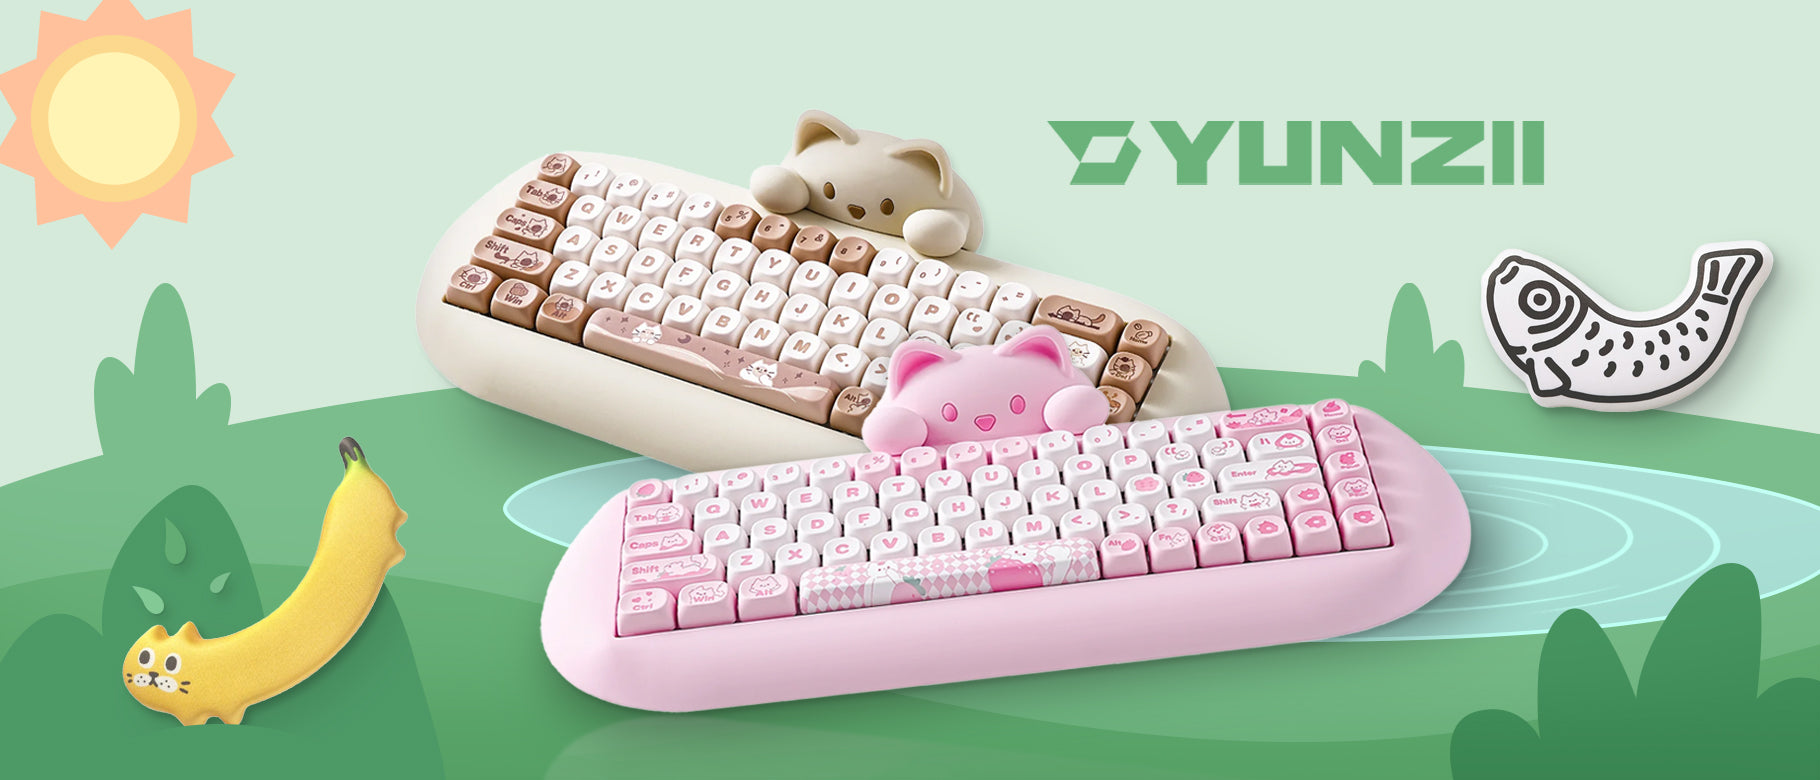 Yunzii C68 Cat Silicone mechanical keyboard pictured in both pink and white colorway and in the brown and cream colorway